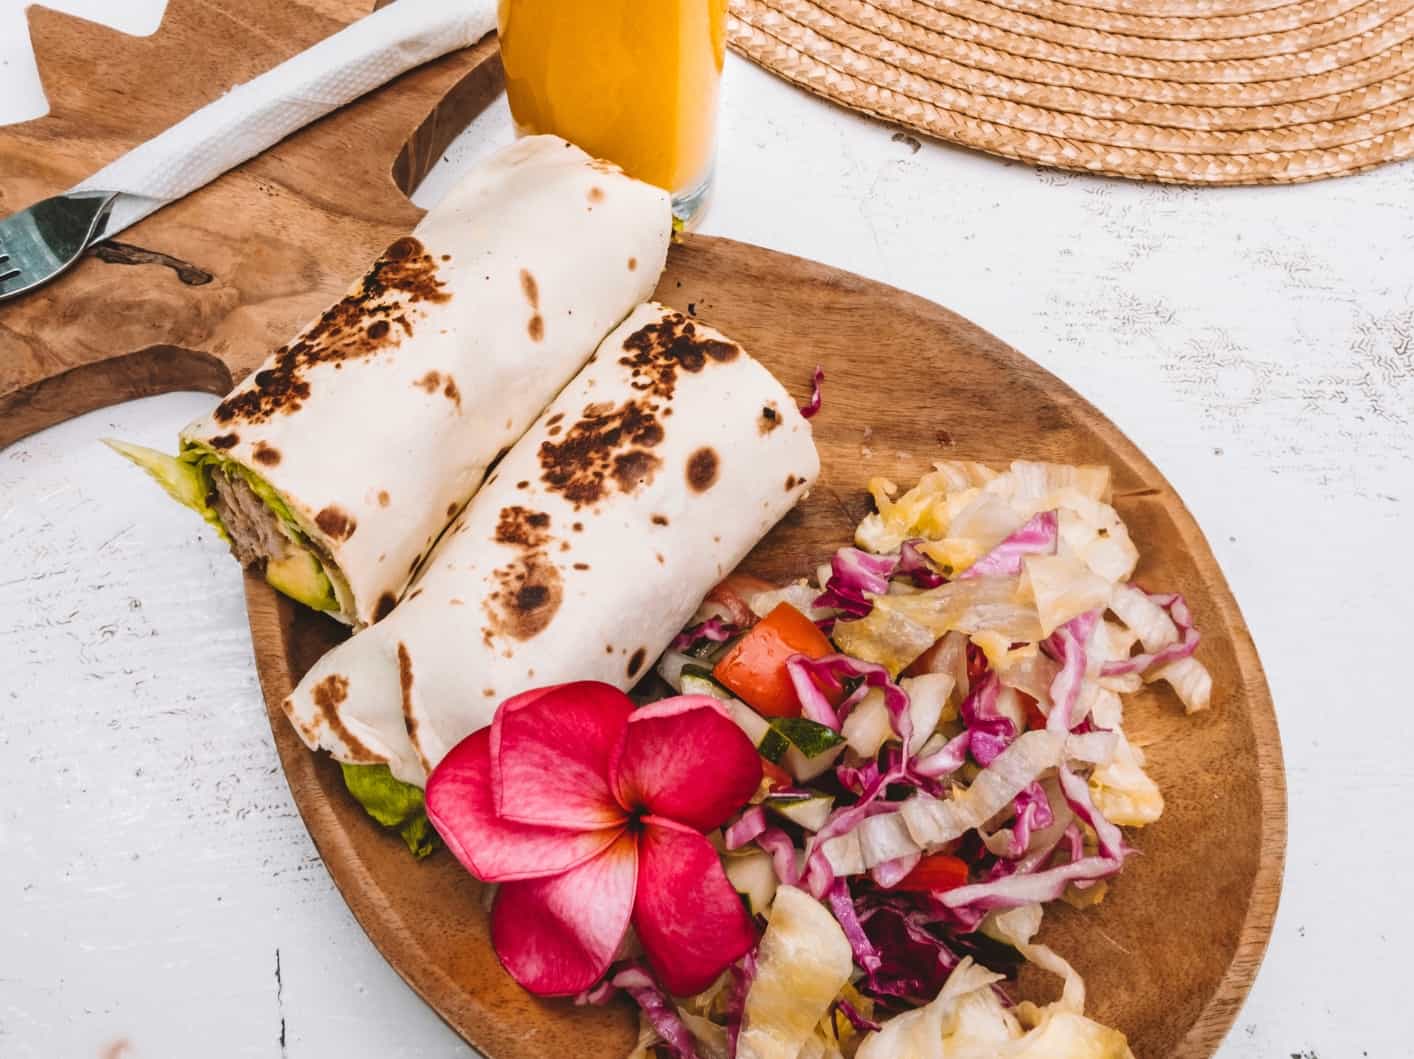 A tasty tuna salad wrap from Hellocapitano Lifestyle Cafe in Gili T